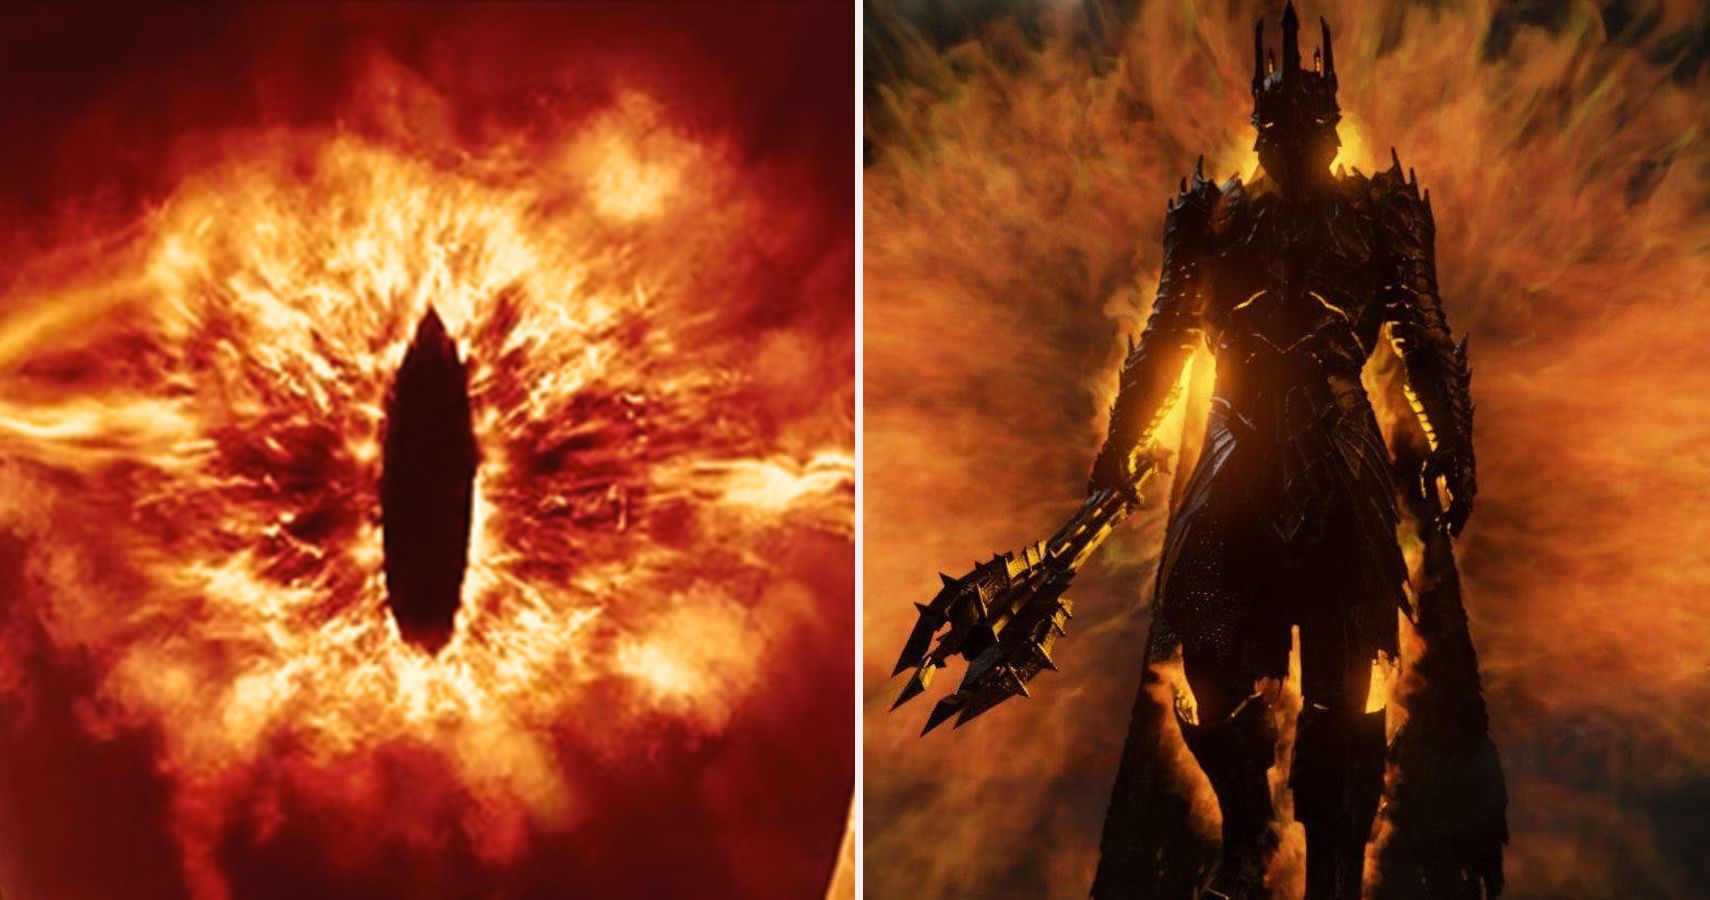 The Lord Of The Rings 10 Facts About Sauron They Leave Out Of The Movies